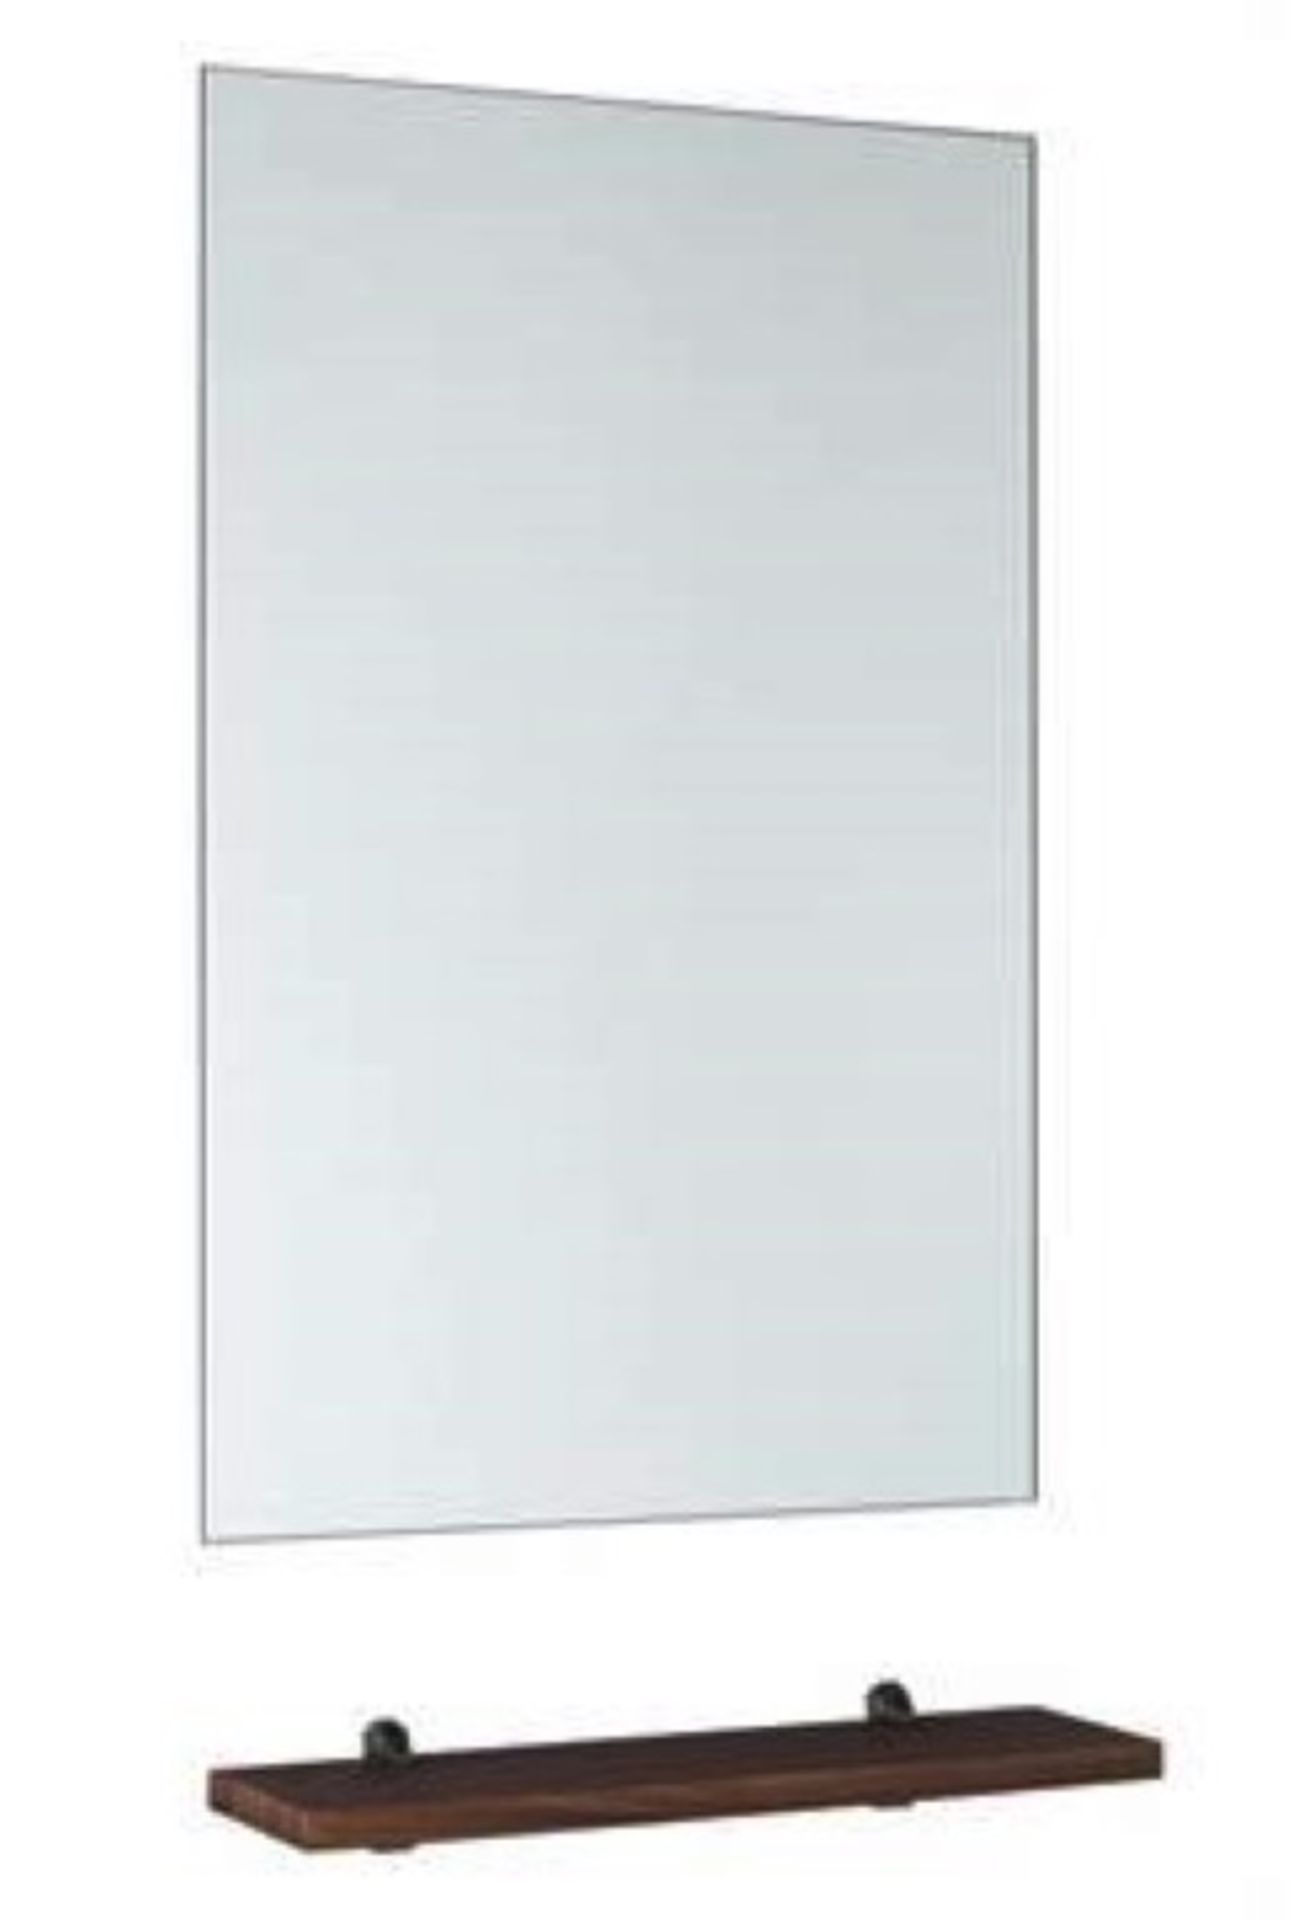 5 x Vogue Bathrooms JUNO Wall Hung Bathroom Mirrors With WALNUT Shelves - 450mm Width - Splash and